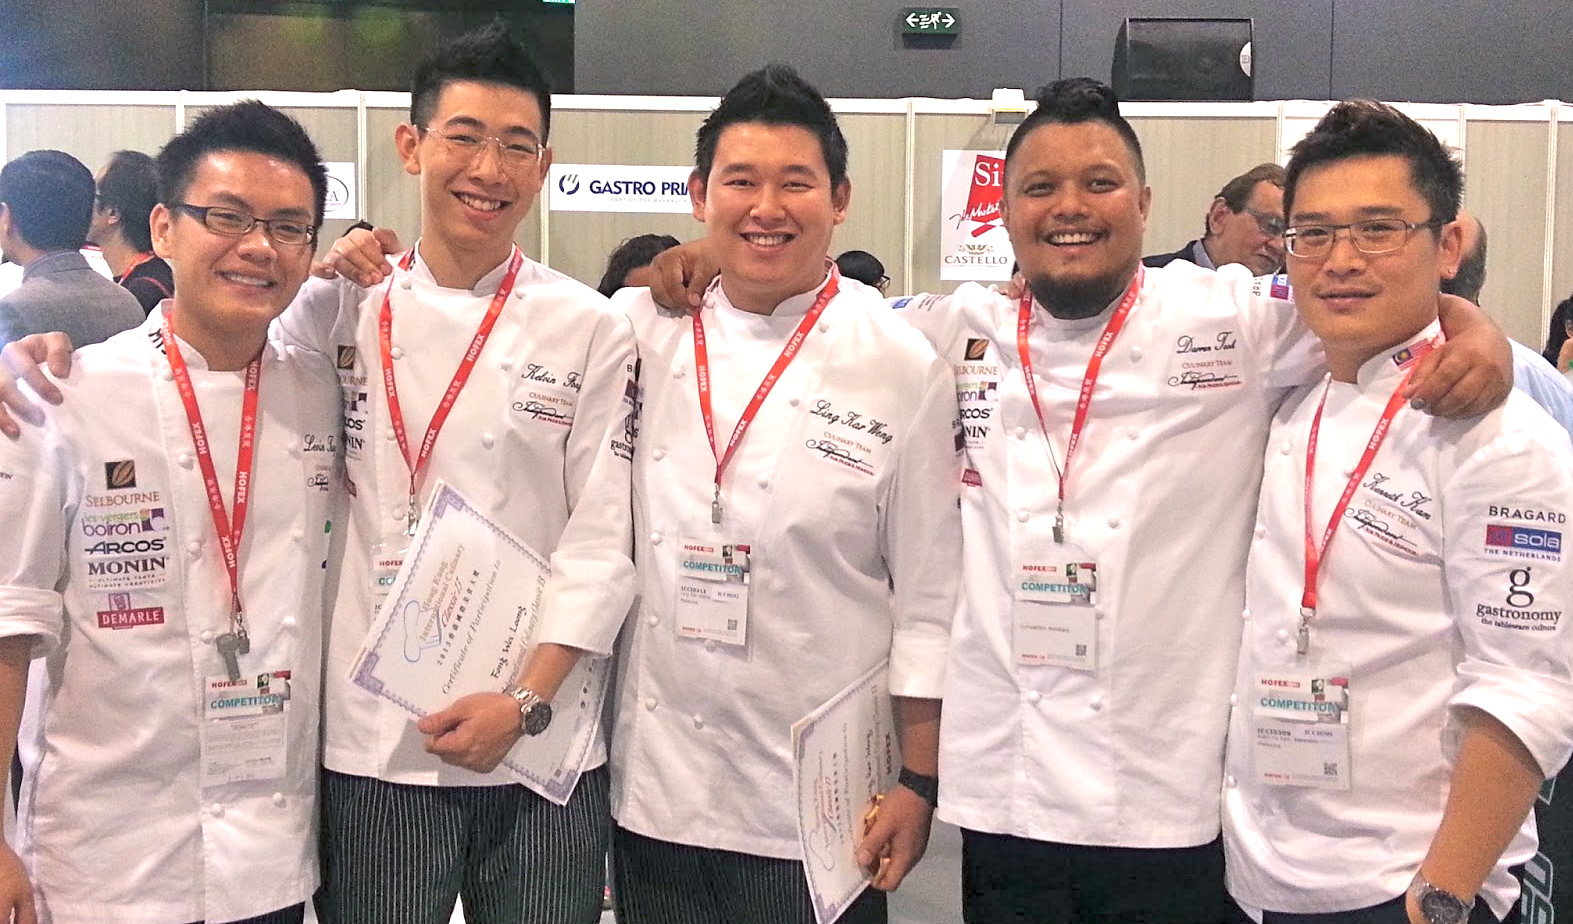 KDU's Award-Winning Chefs - From left: Levin Tung, Fong Wei Loong, Ling Kar Weng, Chef Darren Teoh and Chef Kenneth Kam (School of Hospitality, Tourism and Culinary Arts).